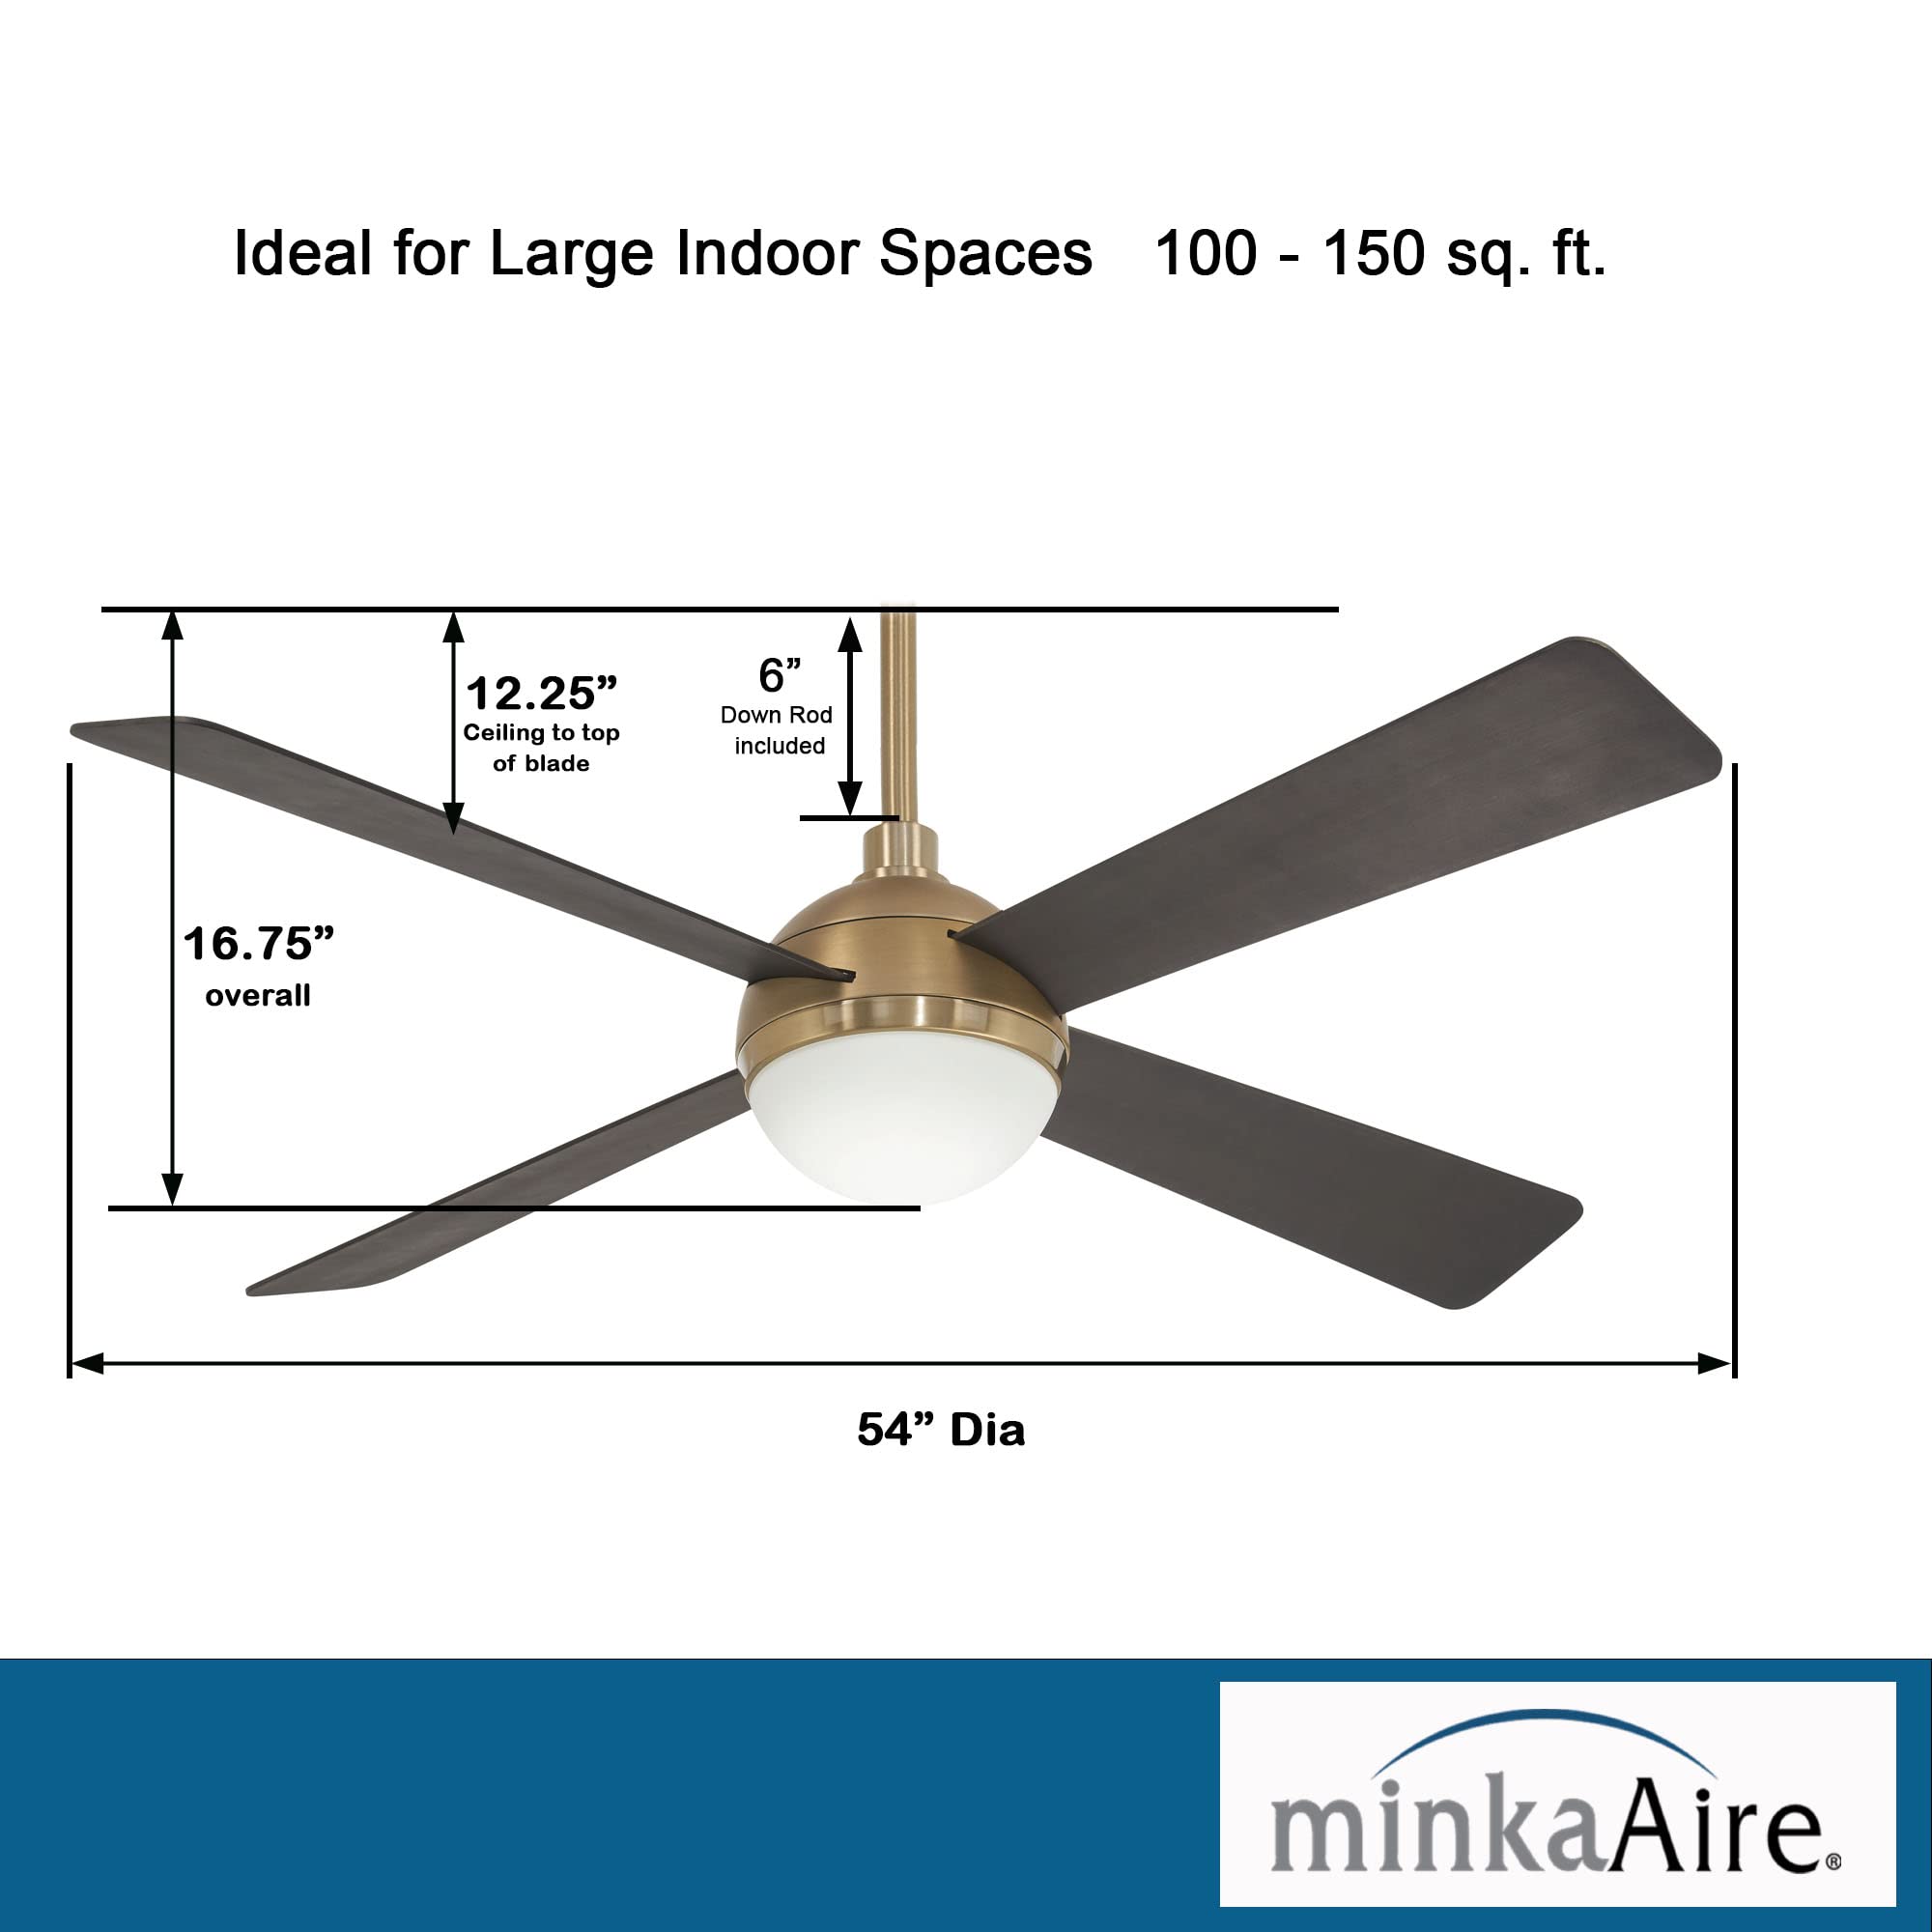 MINKA-AIRE F623L-BBR/SBR Orb 54 Inch Ceiling Fan with Integrated 16W LED Light in Brushed Brass/Soft Brass Finish